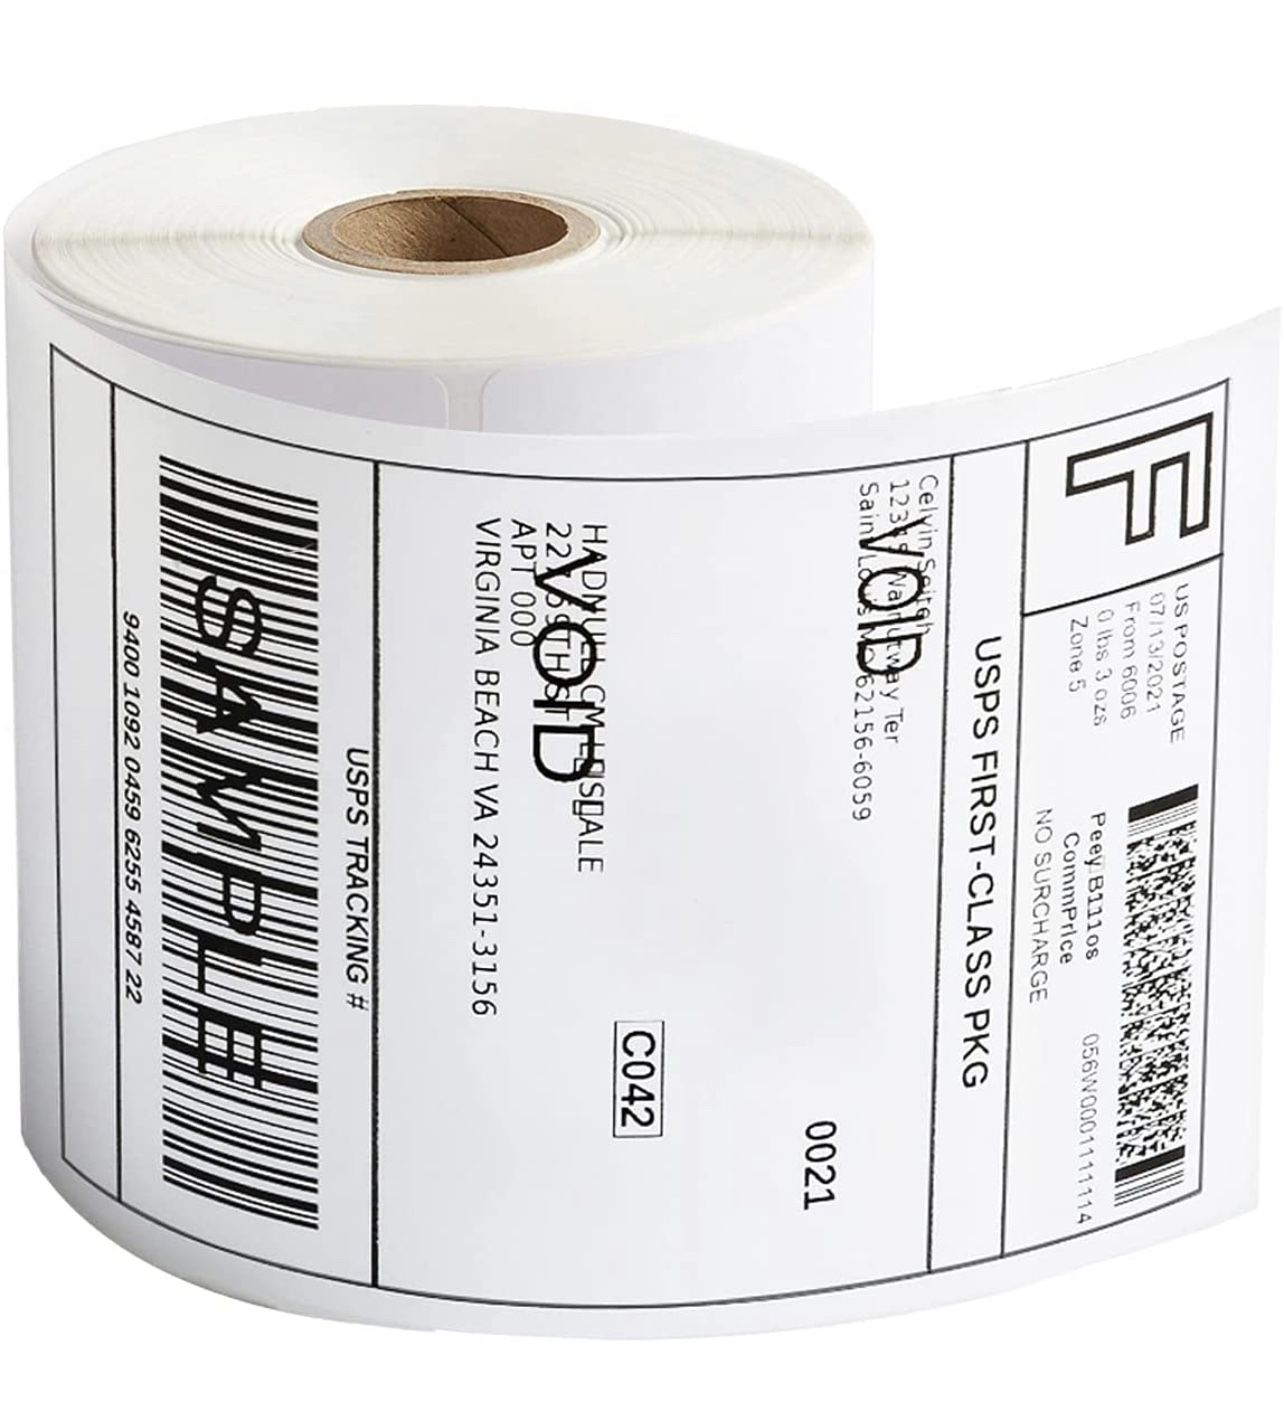 4"x 6" Direct Thermal Shipping Labels, 1" Core, Perforated, 250 Labels